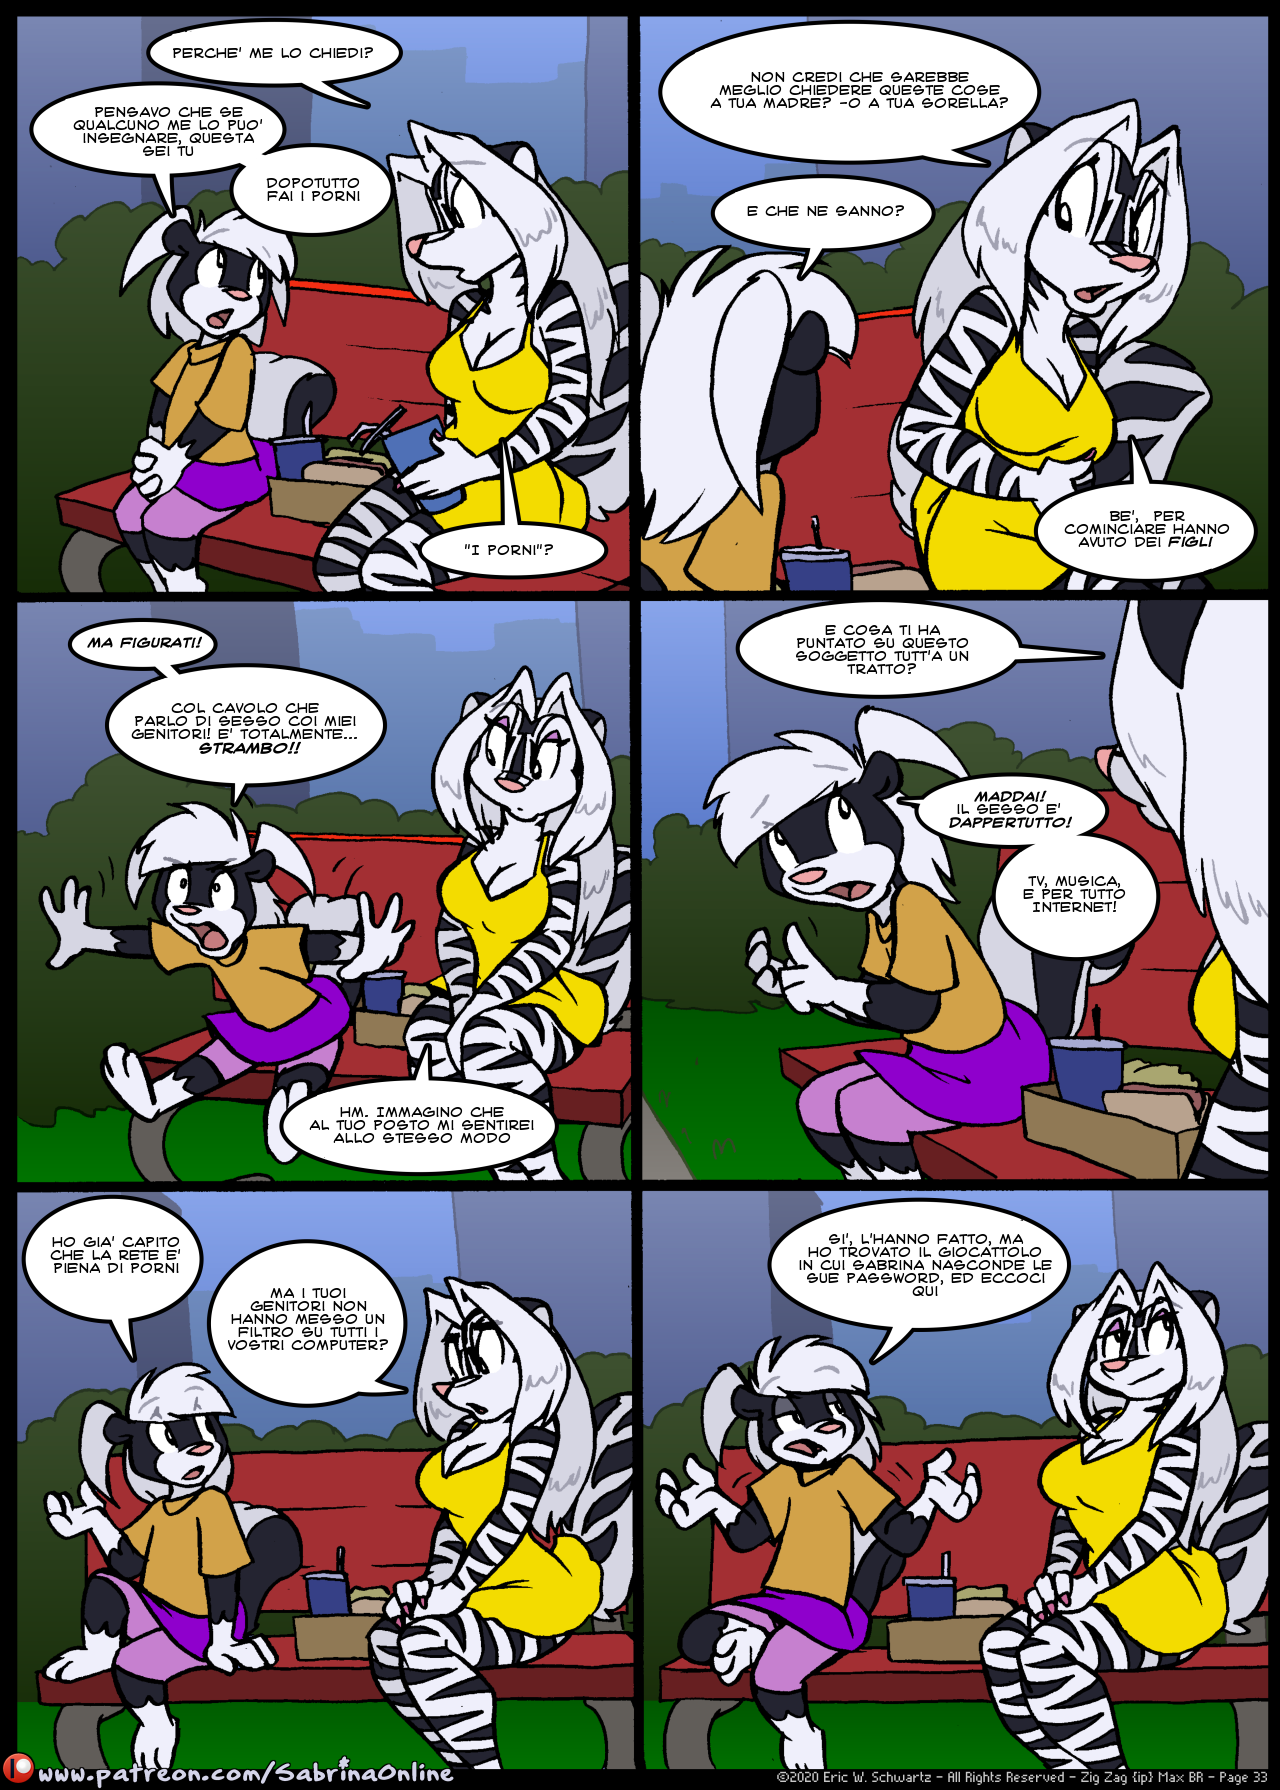 SOL_03_Skunks-day-out-33.png